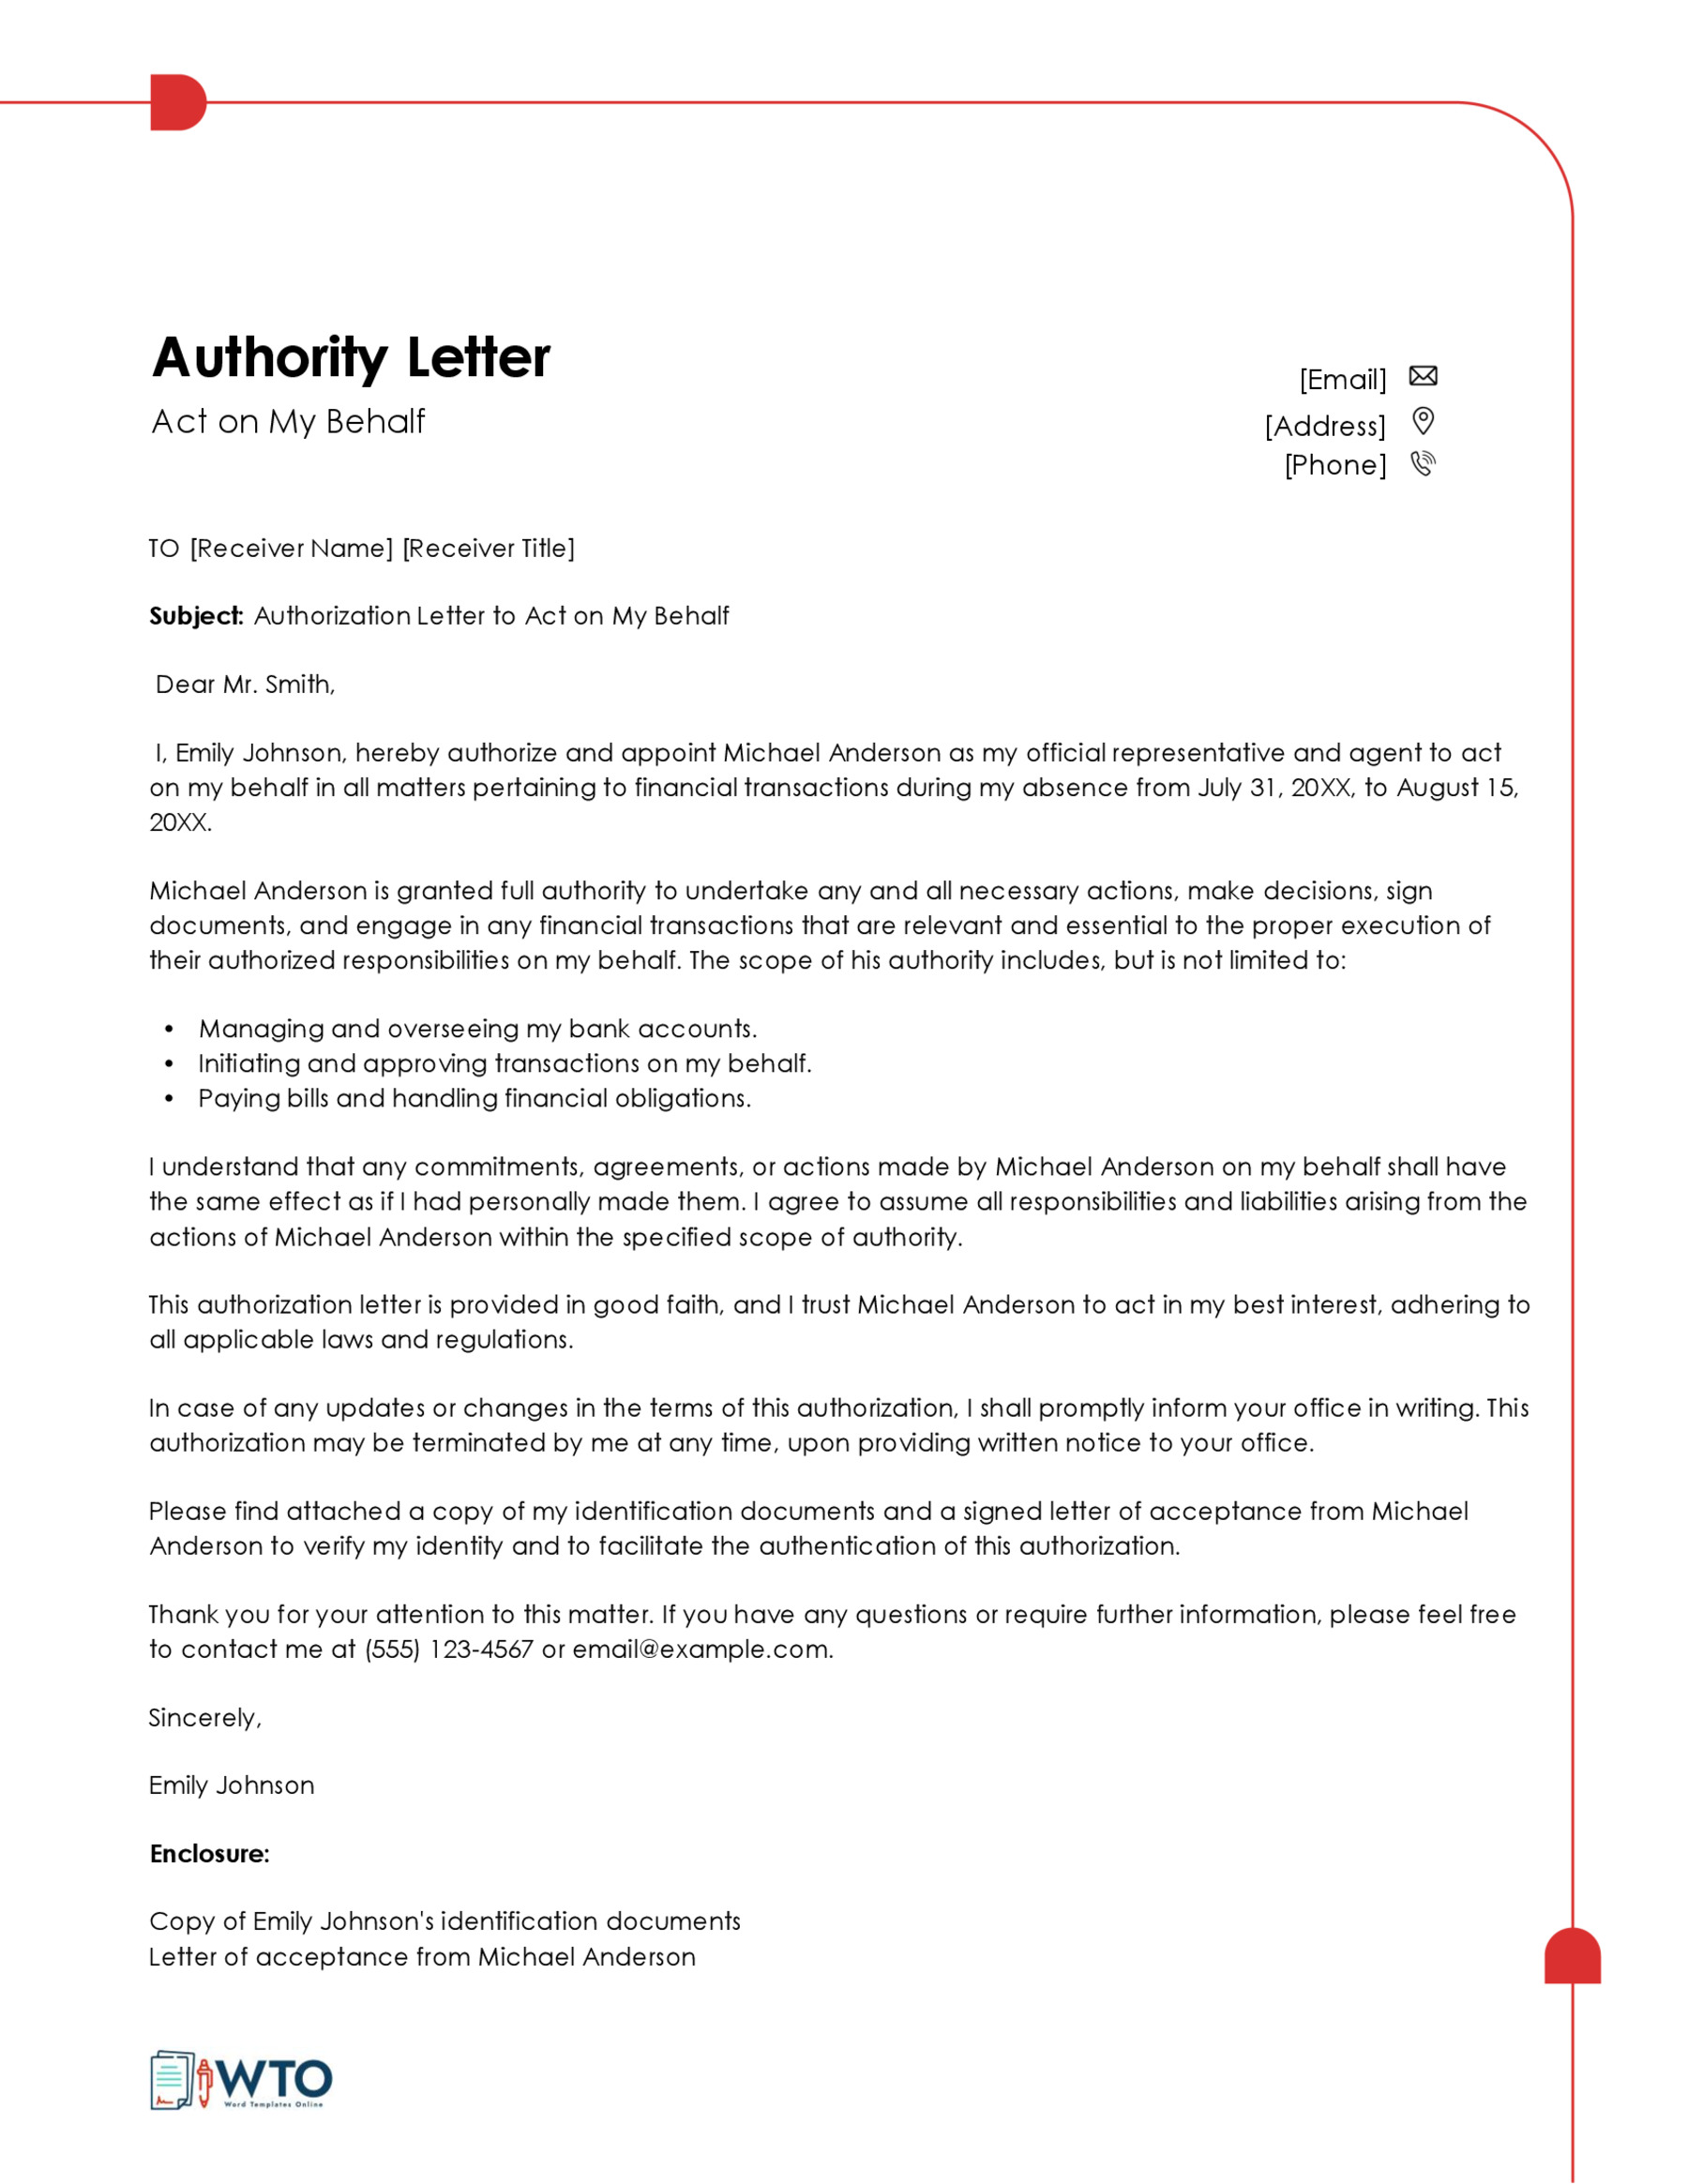 Authorization Letter to act Sample-in Ms word free downlaod